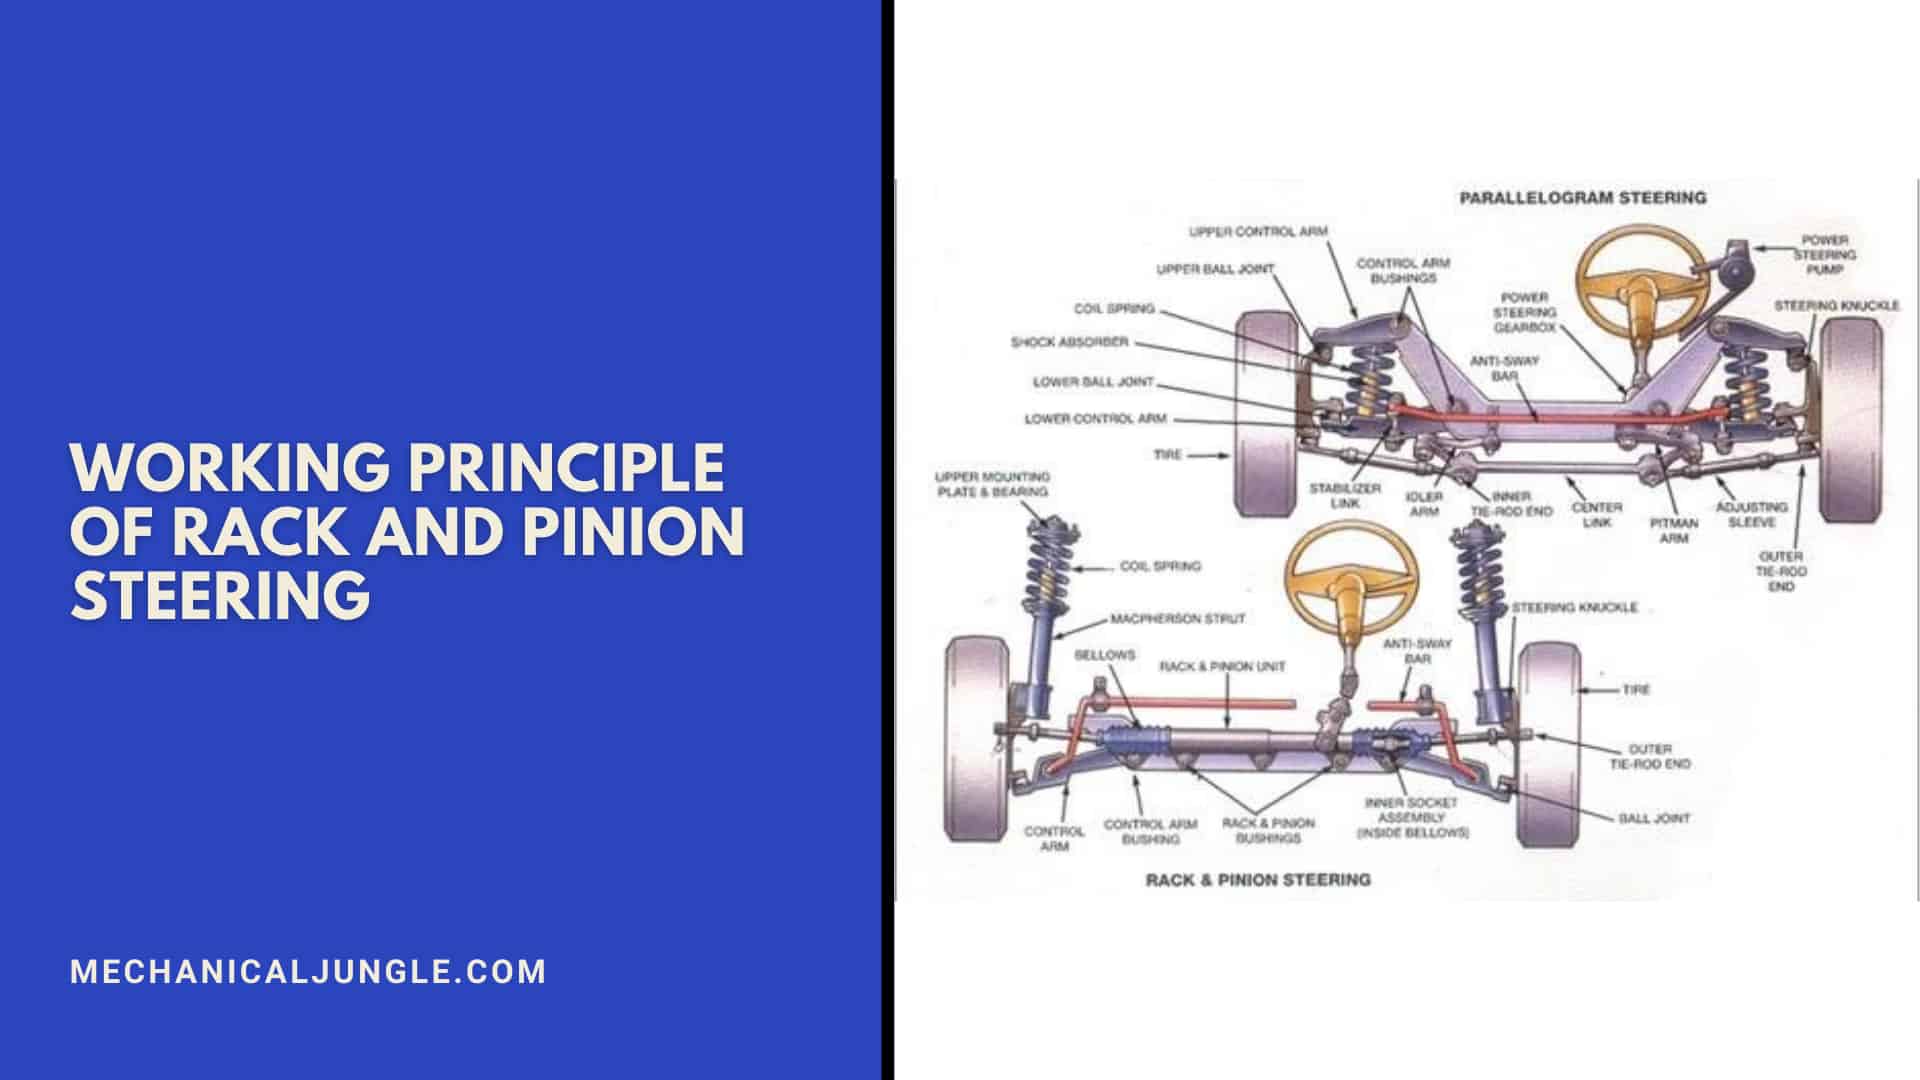 Working Principle of Rack and Pinion Steering